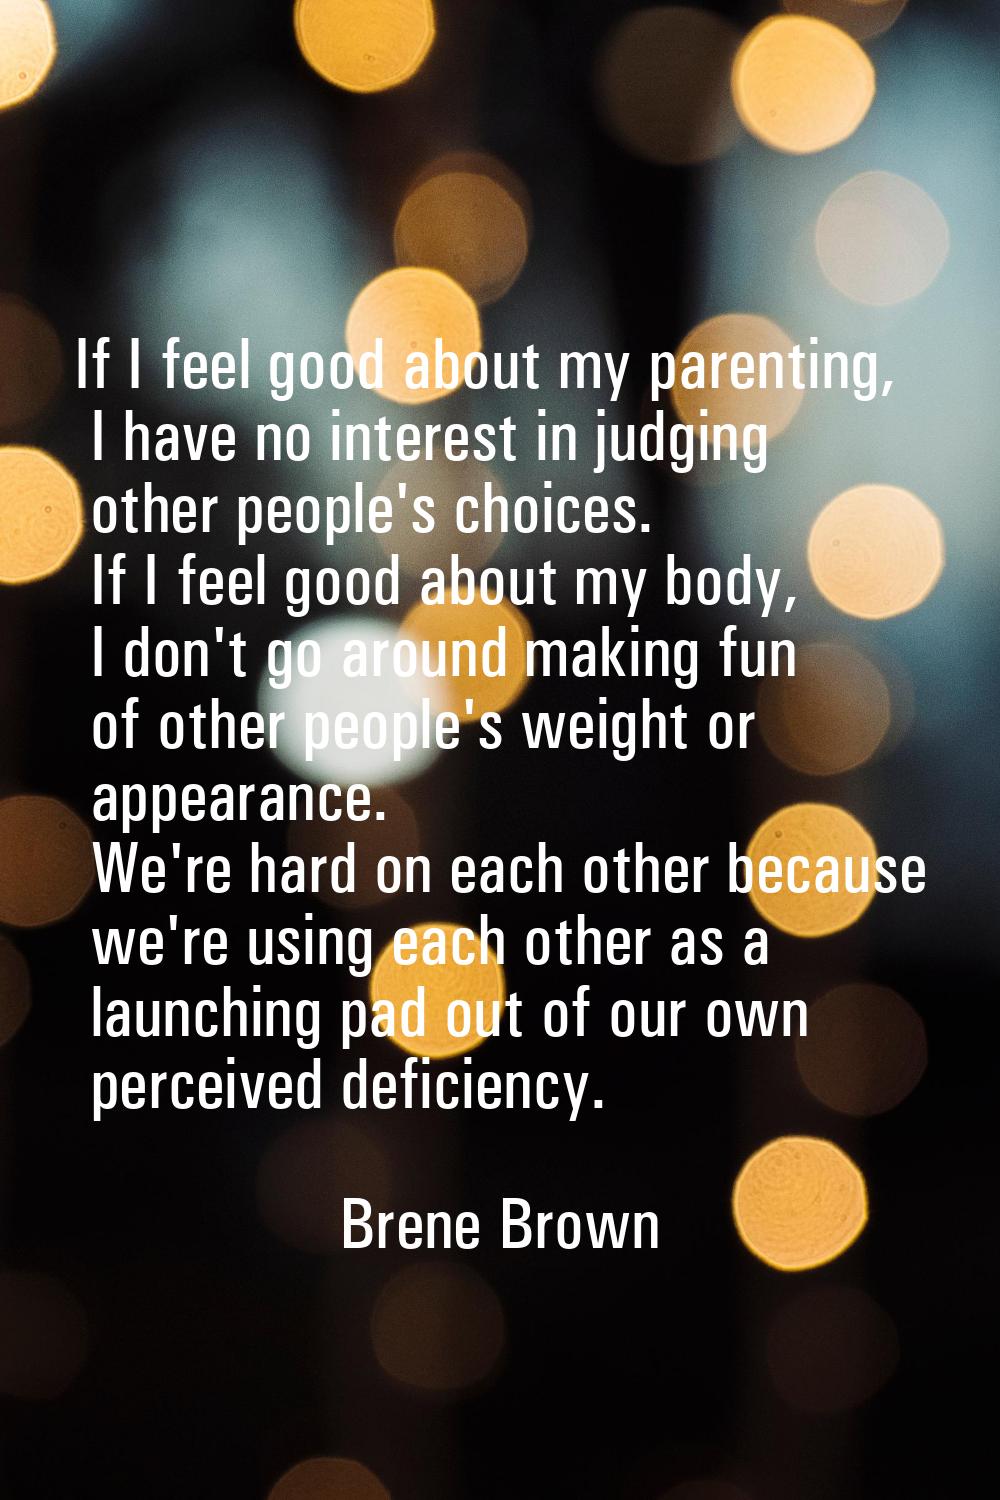 If I feel good about my parenting, I have no interest in judging other people's choices. If I feel 